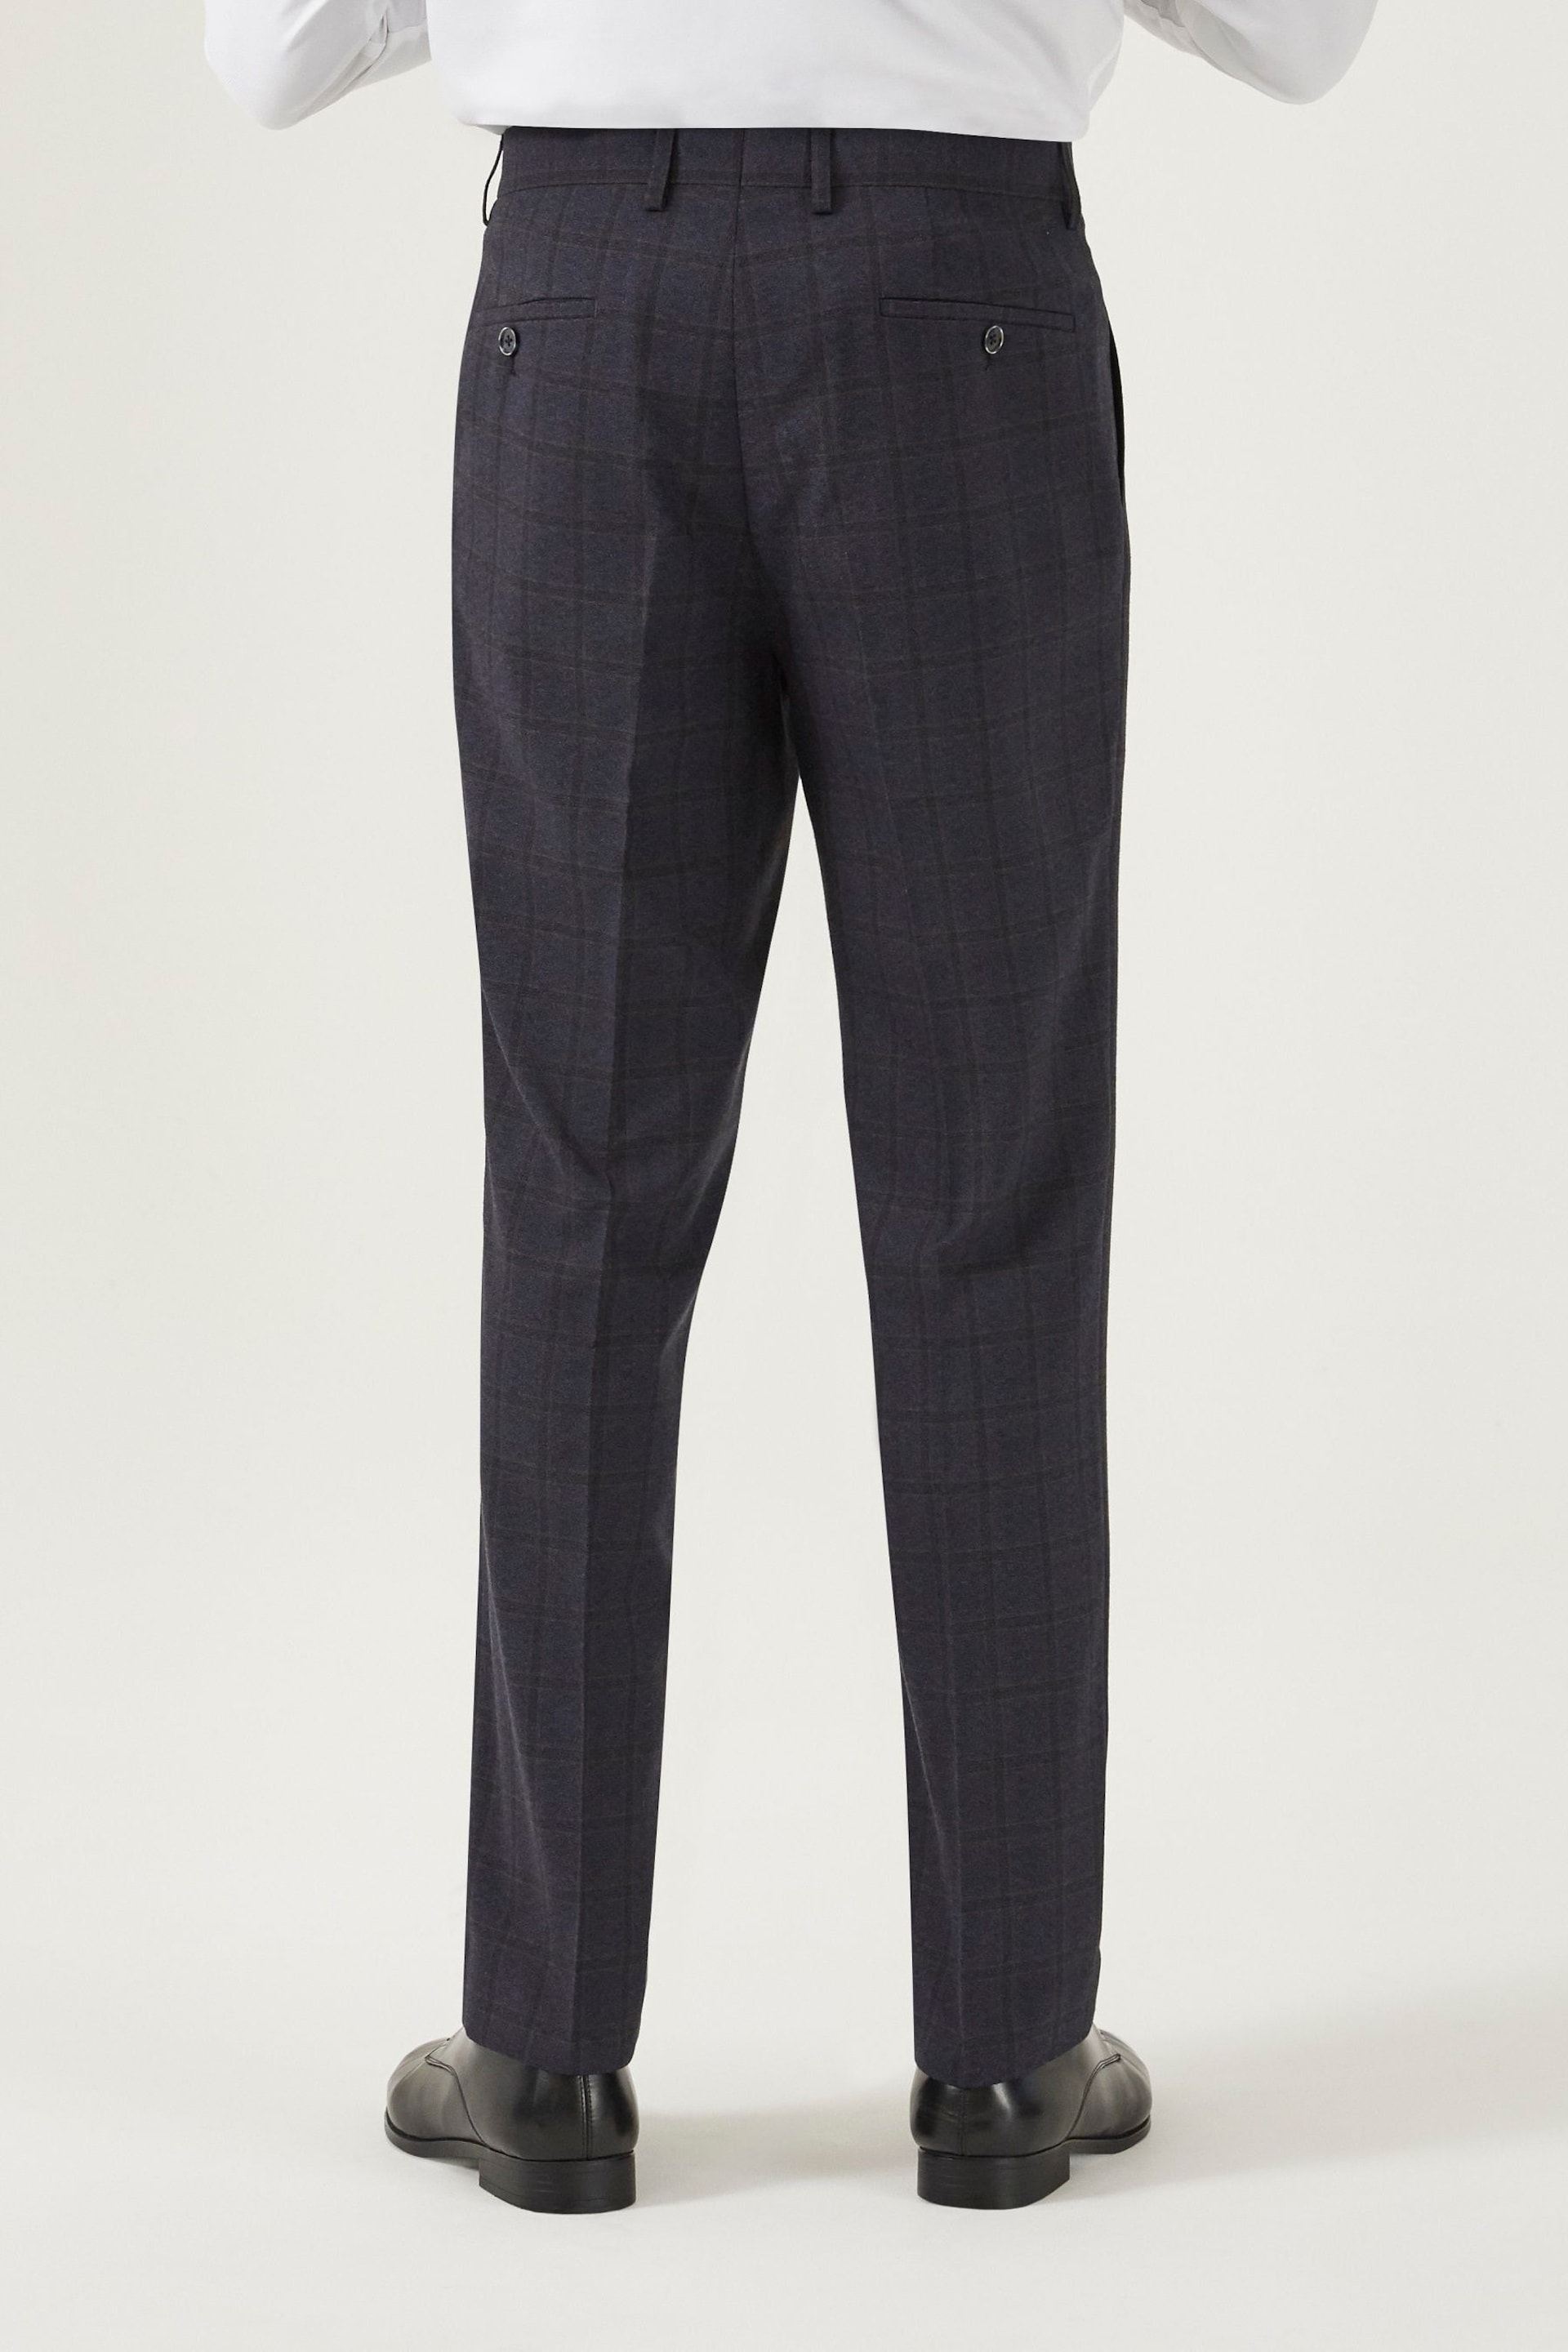 Skopes Curry Navy Blue Check Tailored Fit Suit Trousers - Image 2 of 3